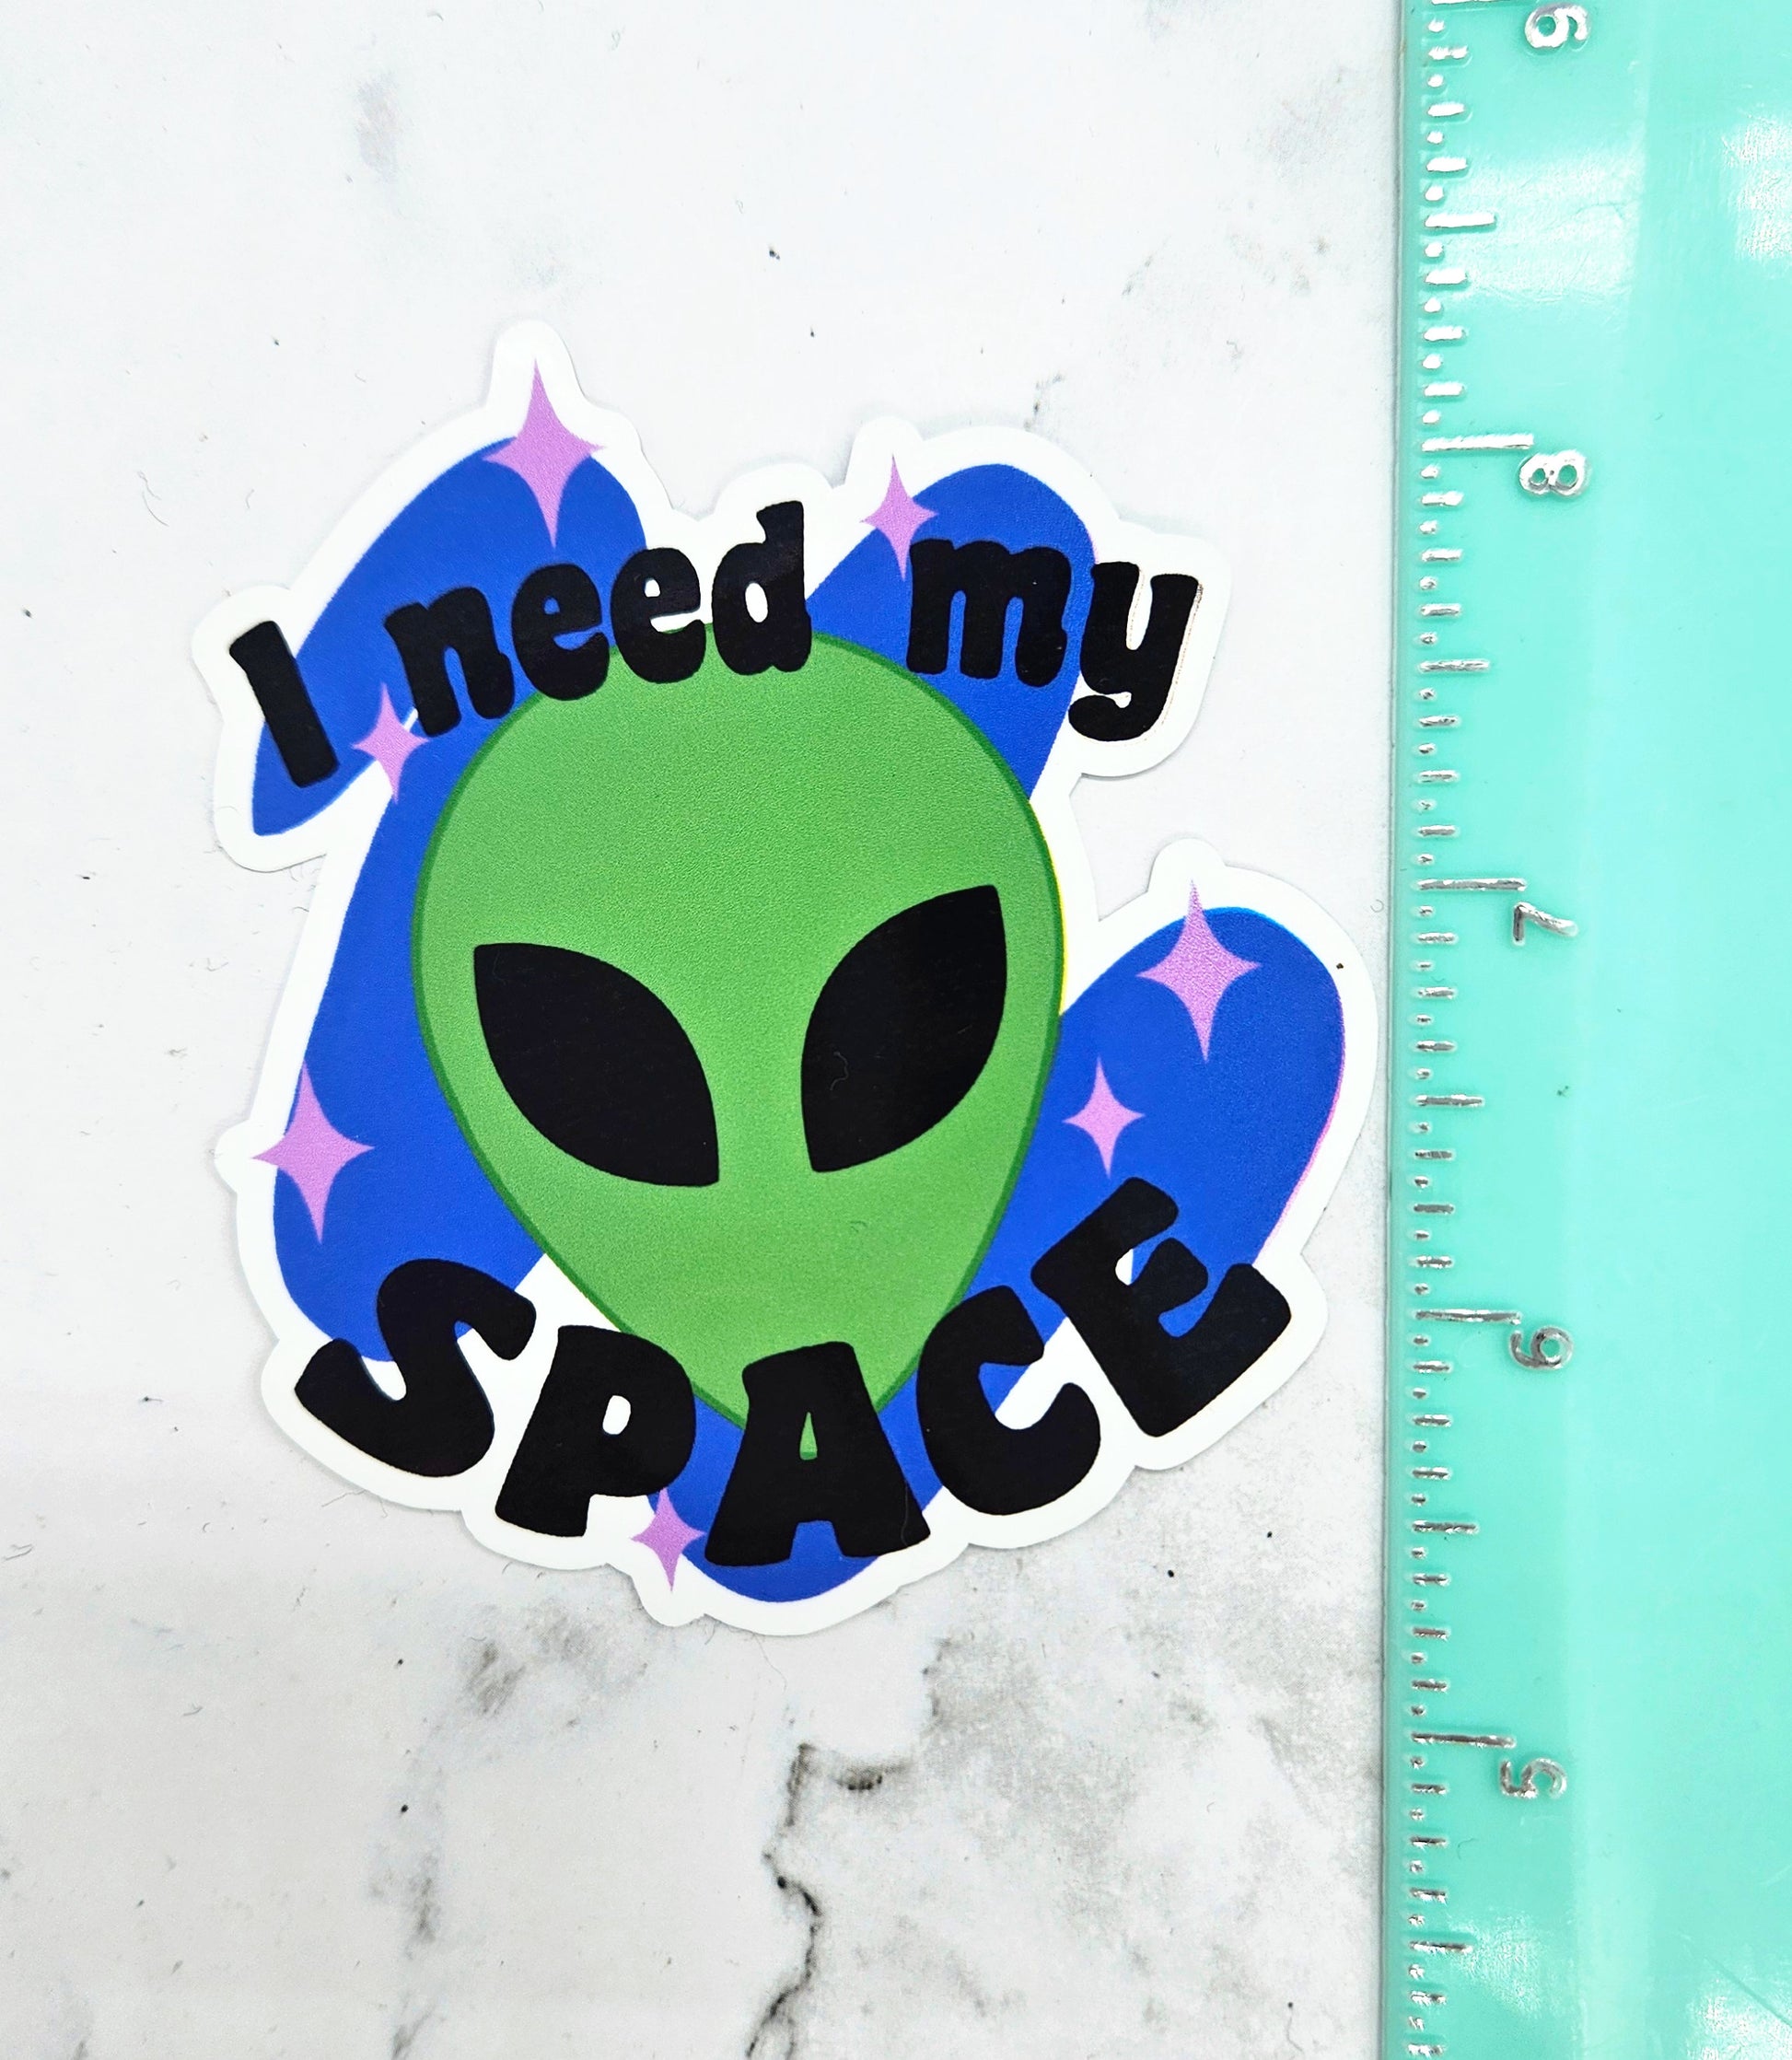 90s Alien Sticker - 1990s Millennial Vibe, Sarcastic Saying, I Need My Space, Old School, Retro, Holo